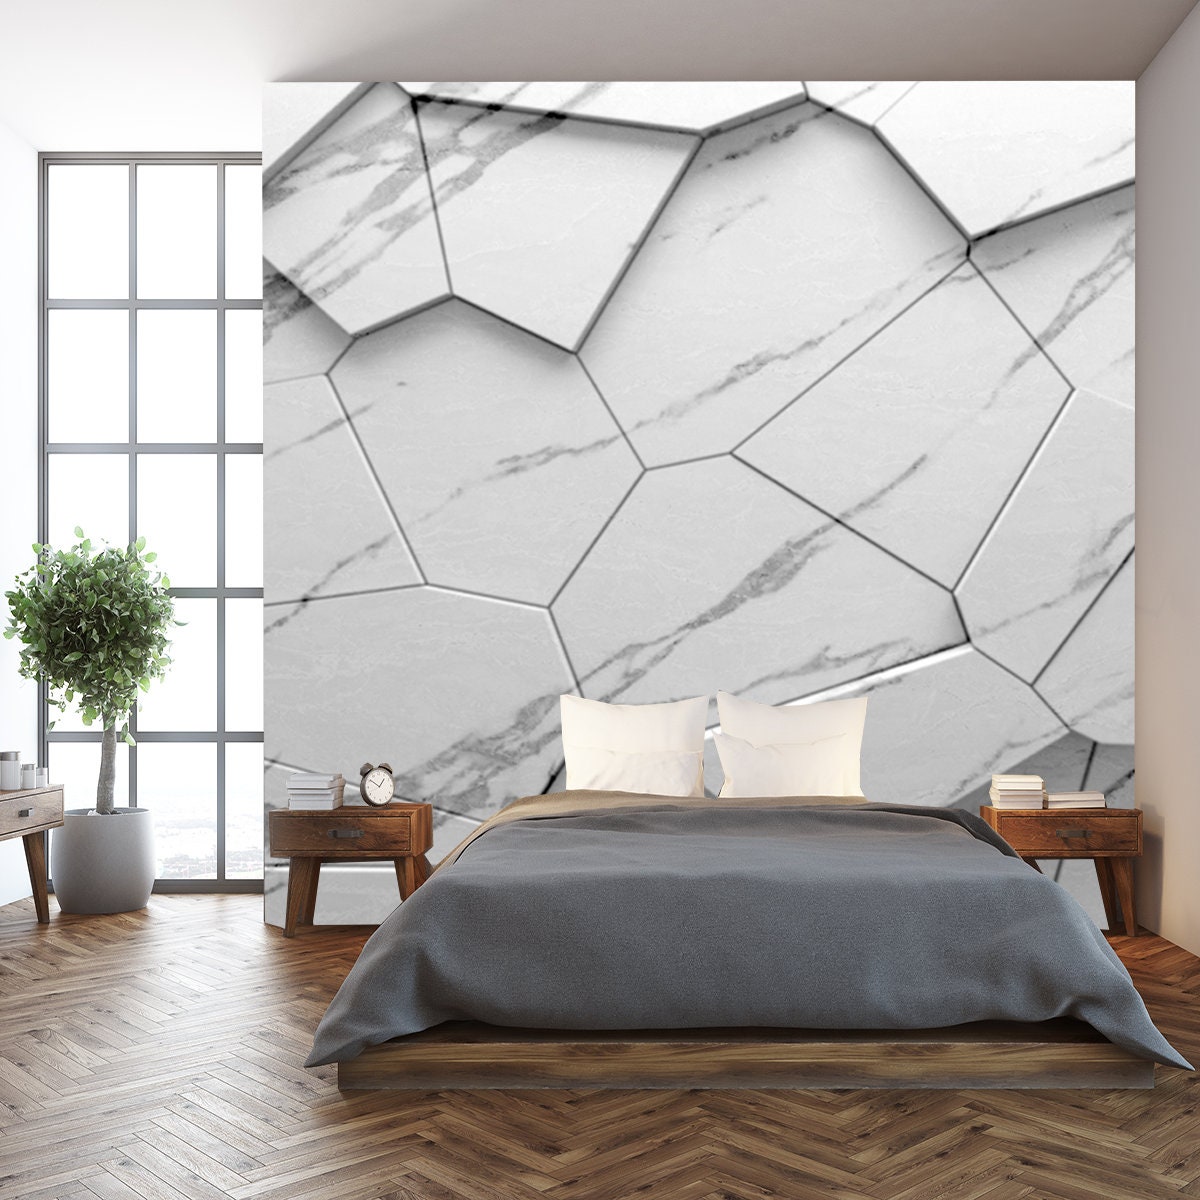 White Marble with Veins, Emperador Marble Texture with High Resolution Wallpaper Bedroom Mural